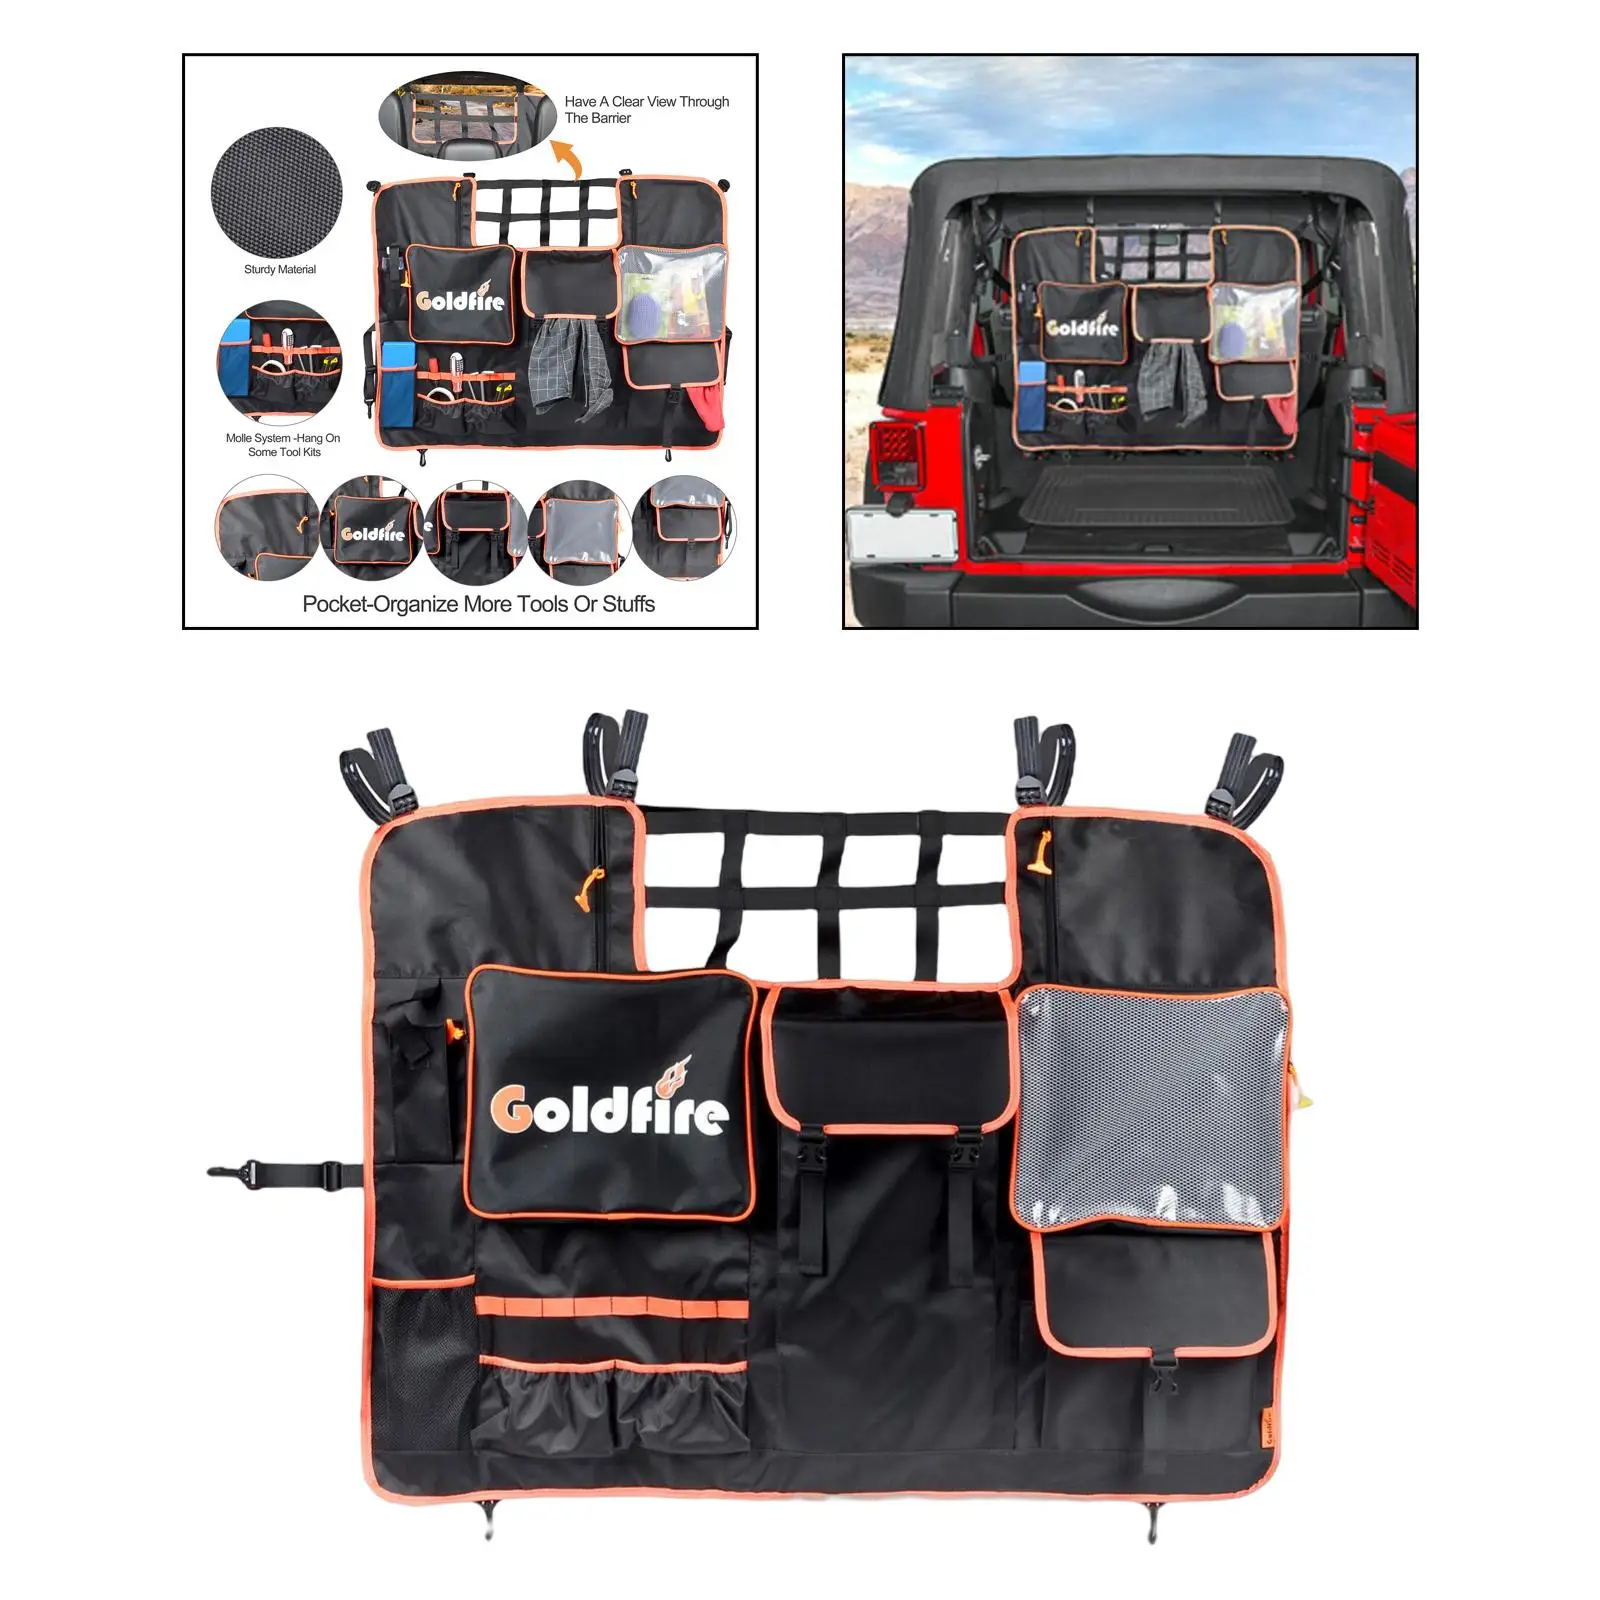 Auto Rear Seat Cover  Back Organizer, Pet Dog   JL 2007-22 Driver Adjustable Straps with Hook